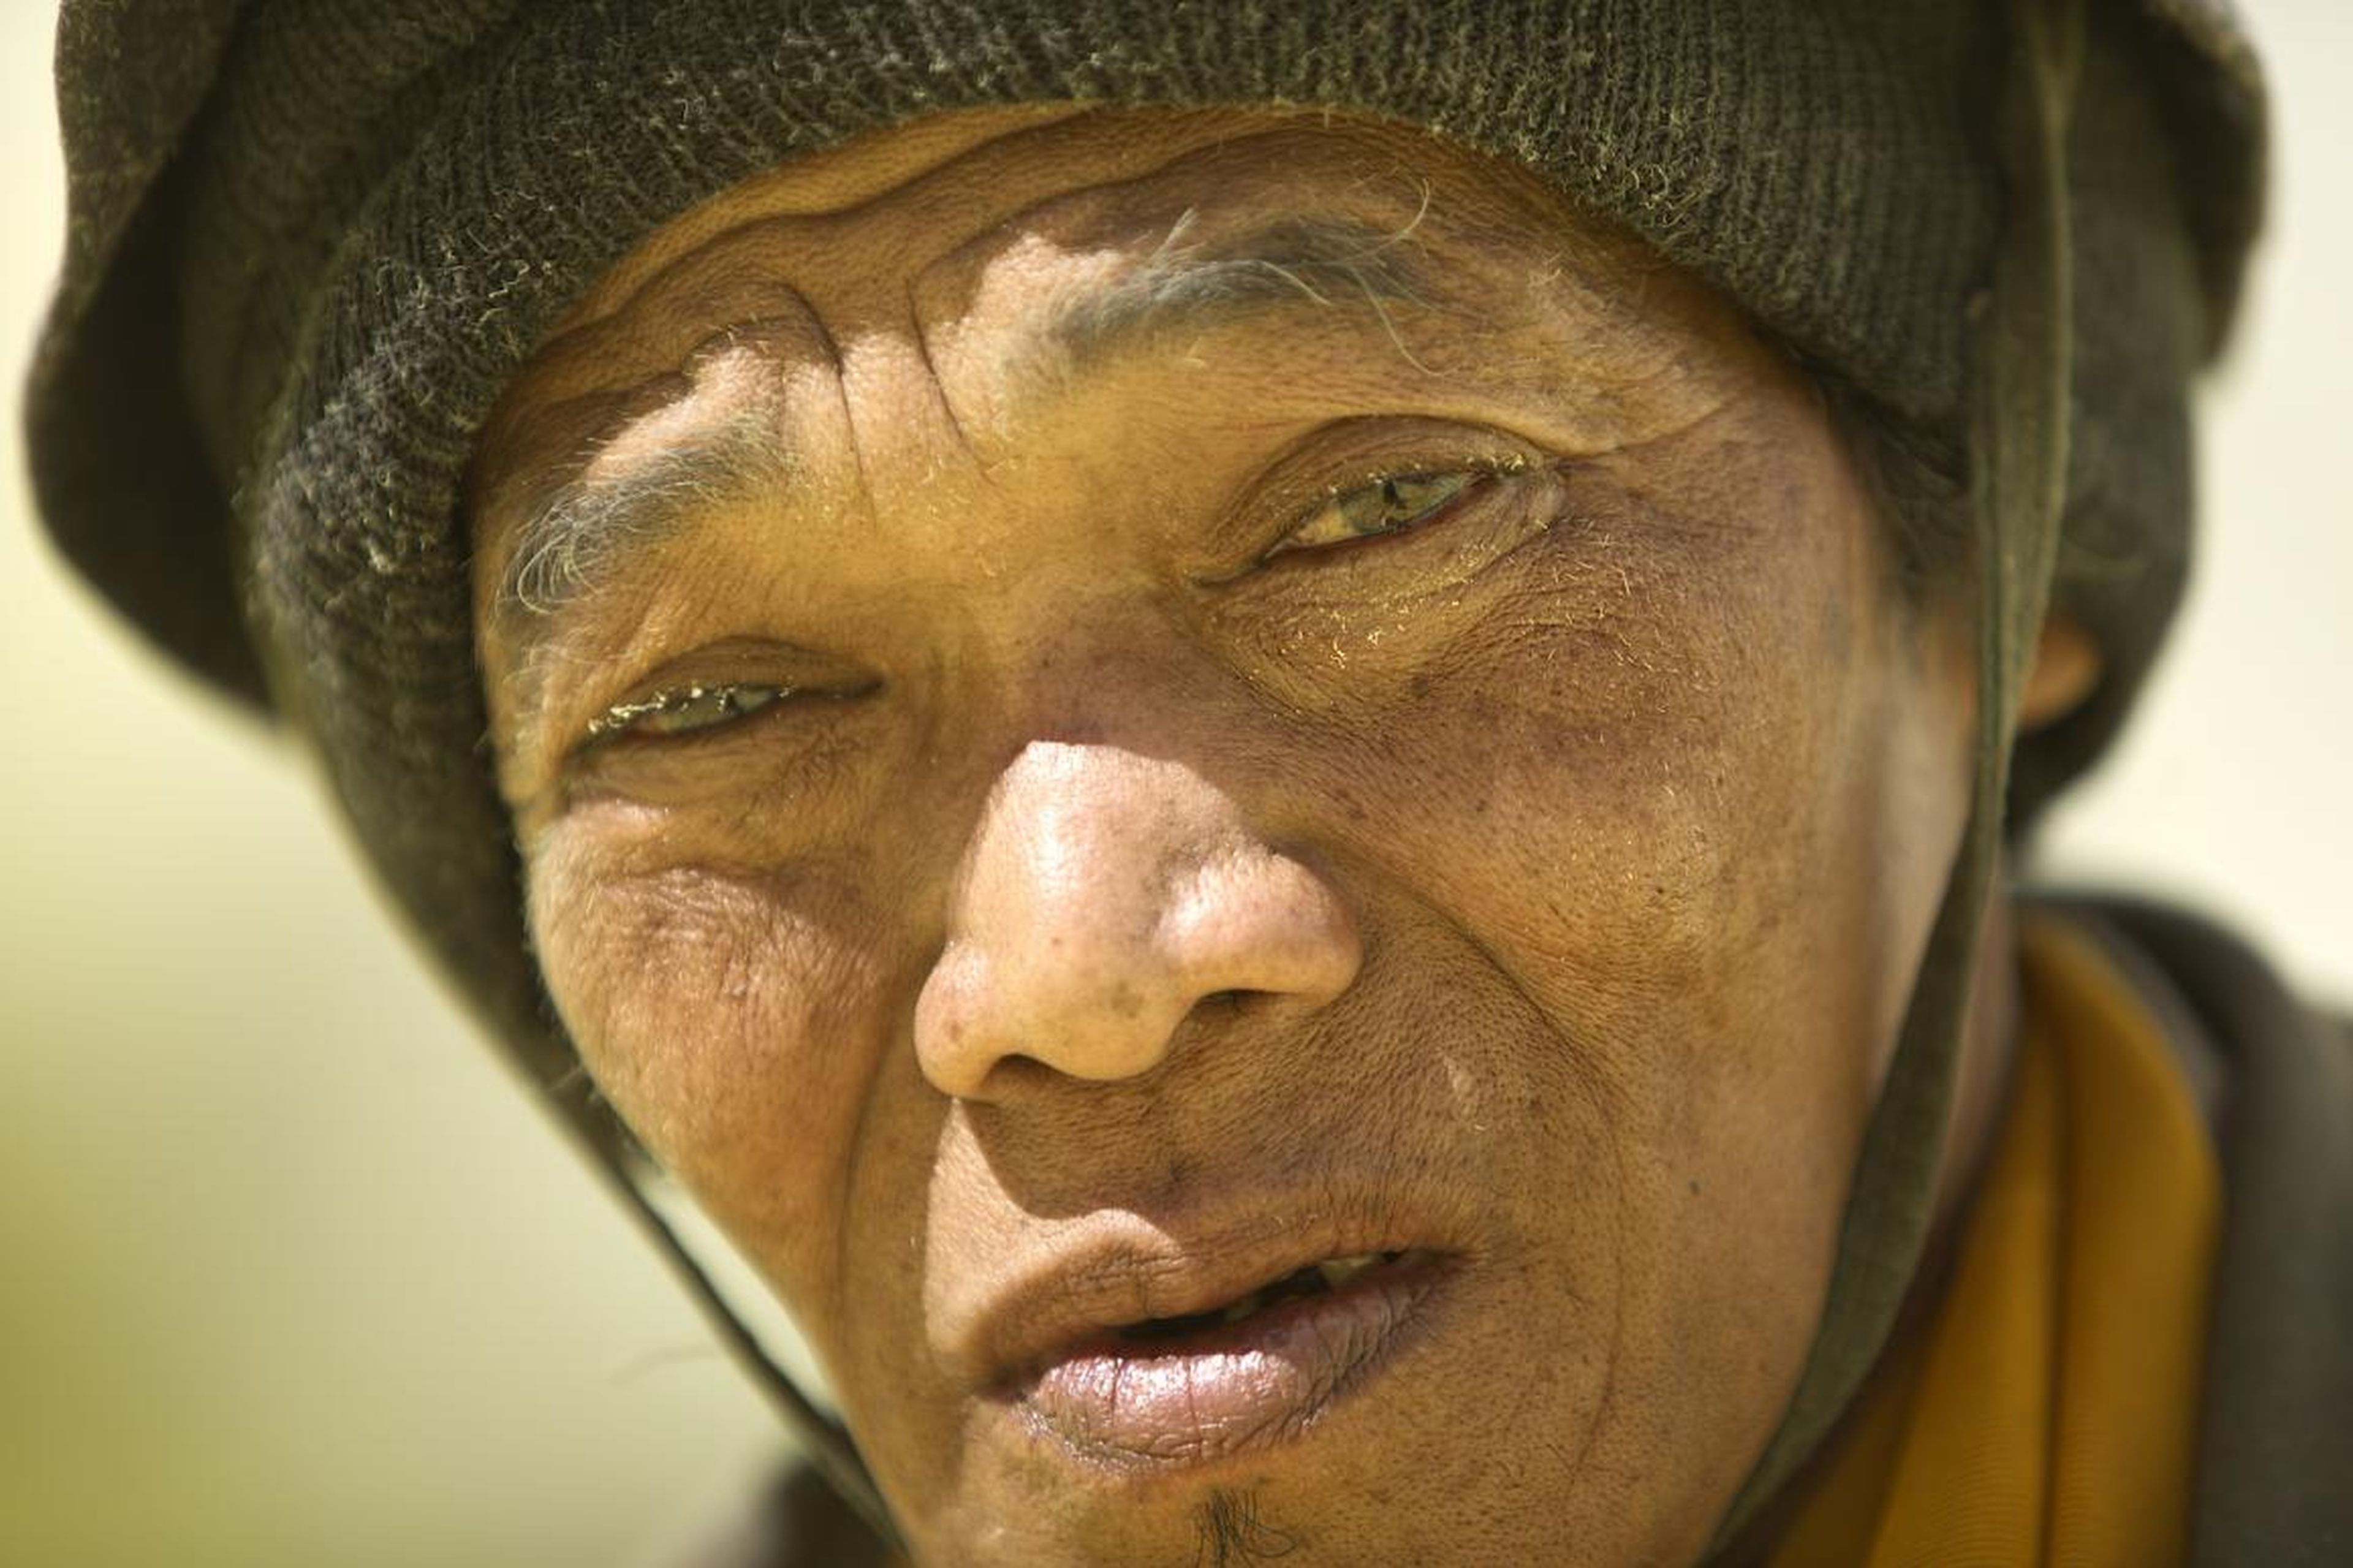 Sulfur particles adorn the eyes and face of this miner in this 2012 photo. "These men were amongst the strongest men that I have ever seen," Brown said.